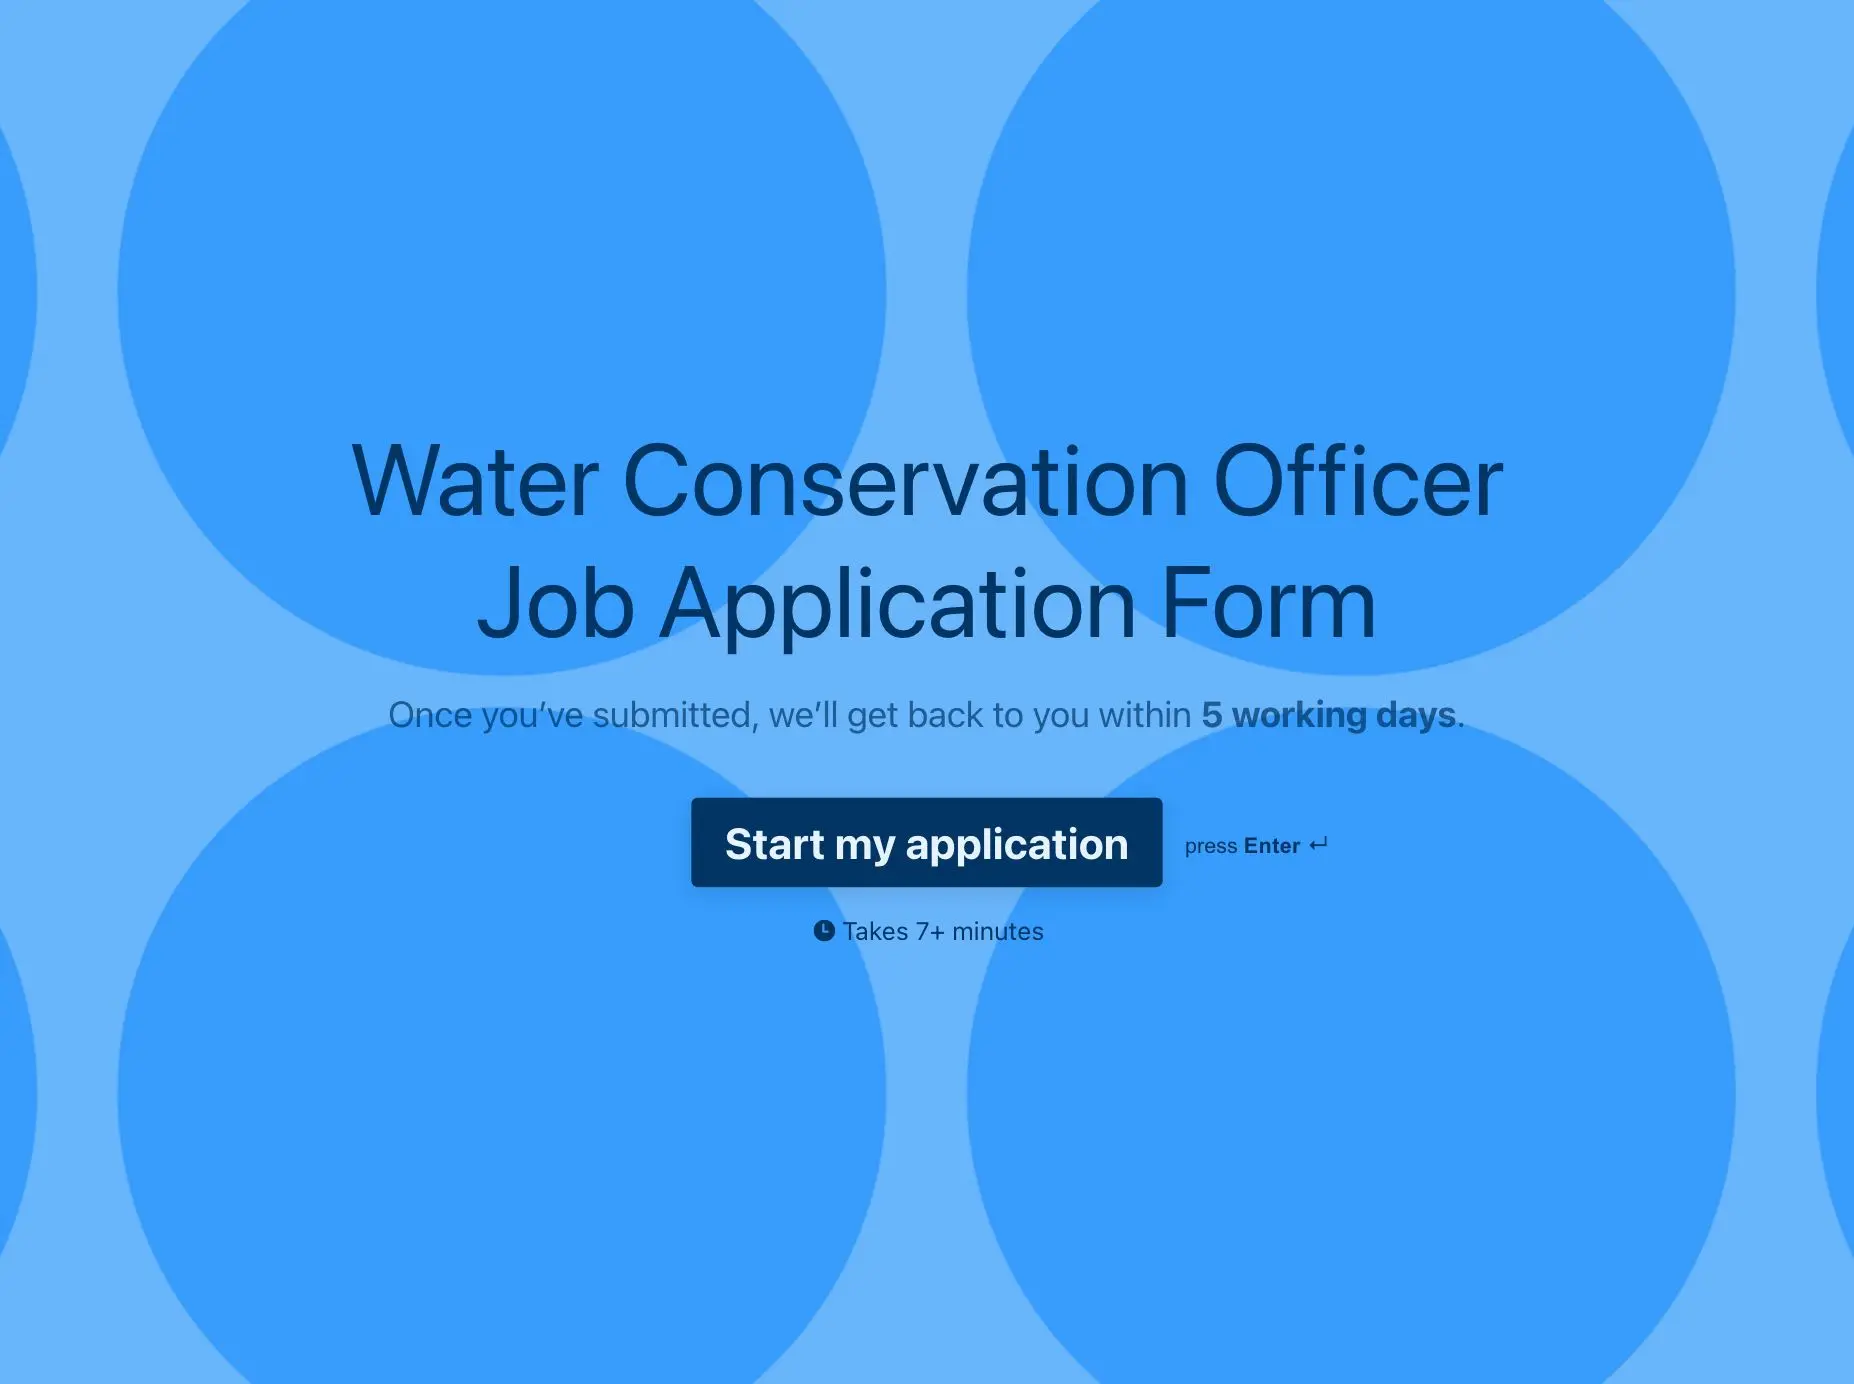 Water Conservation Officer Job Application Form Template Hero